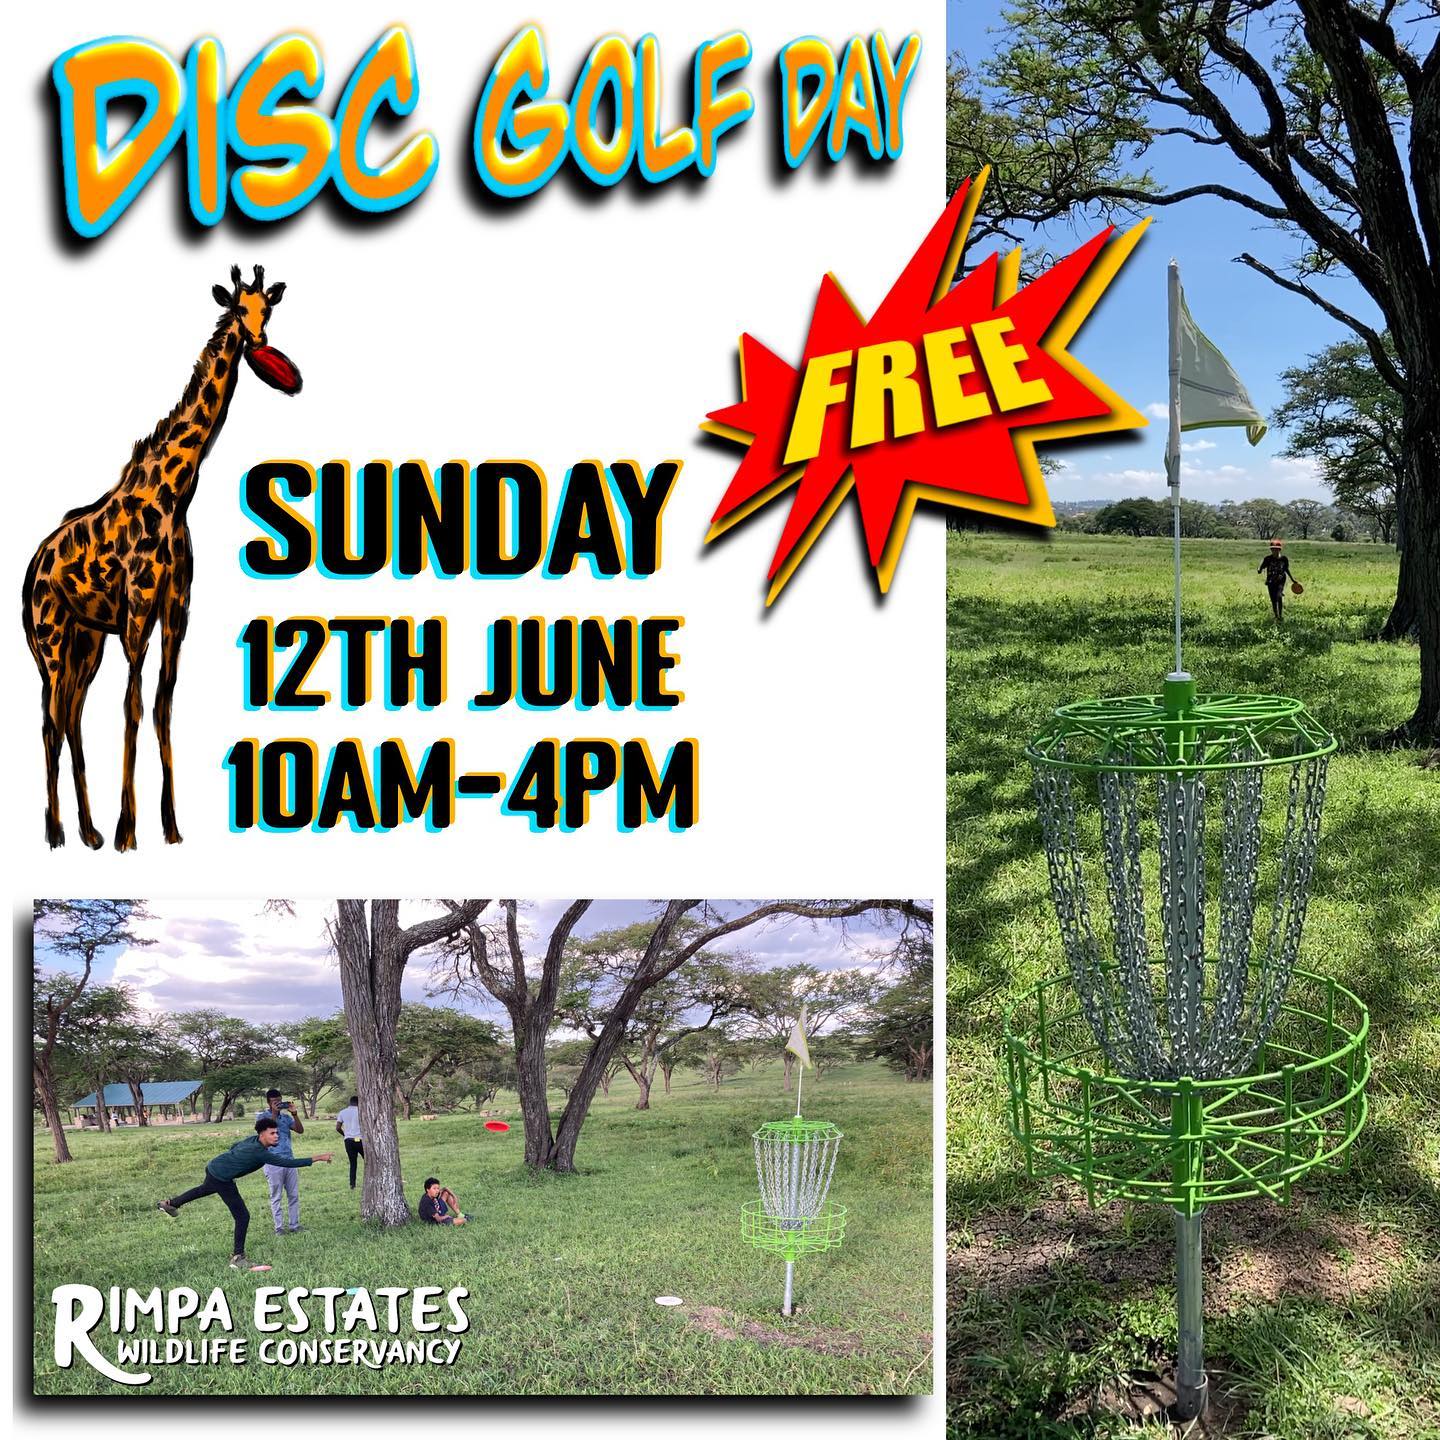 Yesterday was so awesome, we’re doing it again next Sunday!

🗓 Sunday, the 12th of June from 10am to 4pm

🤑100% FREE!

📌 Here at @thereserveatrimpaestates 

🍎 Please bring your own food and drink.

🥏⛓ Learn to play disc golf, then play a few rounds on our 7 baskets.

🧍🏼🧍🏽‍♀️🧍🏾🧍🏿‍♀️🧍🏿 Bring your family and friends! ❤️

🏍If you arrive on public transport you will need to walk the last 1/2km from our bridge to the disc golf course.

#discgolf #playdiscgolf #discgolfkenya #kenya #nairobi #nairobikenya  #discgolflife #freenairobi